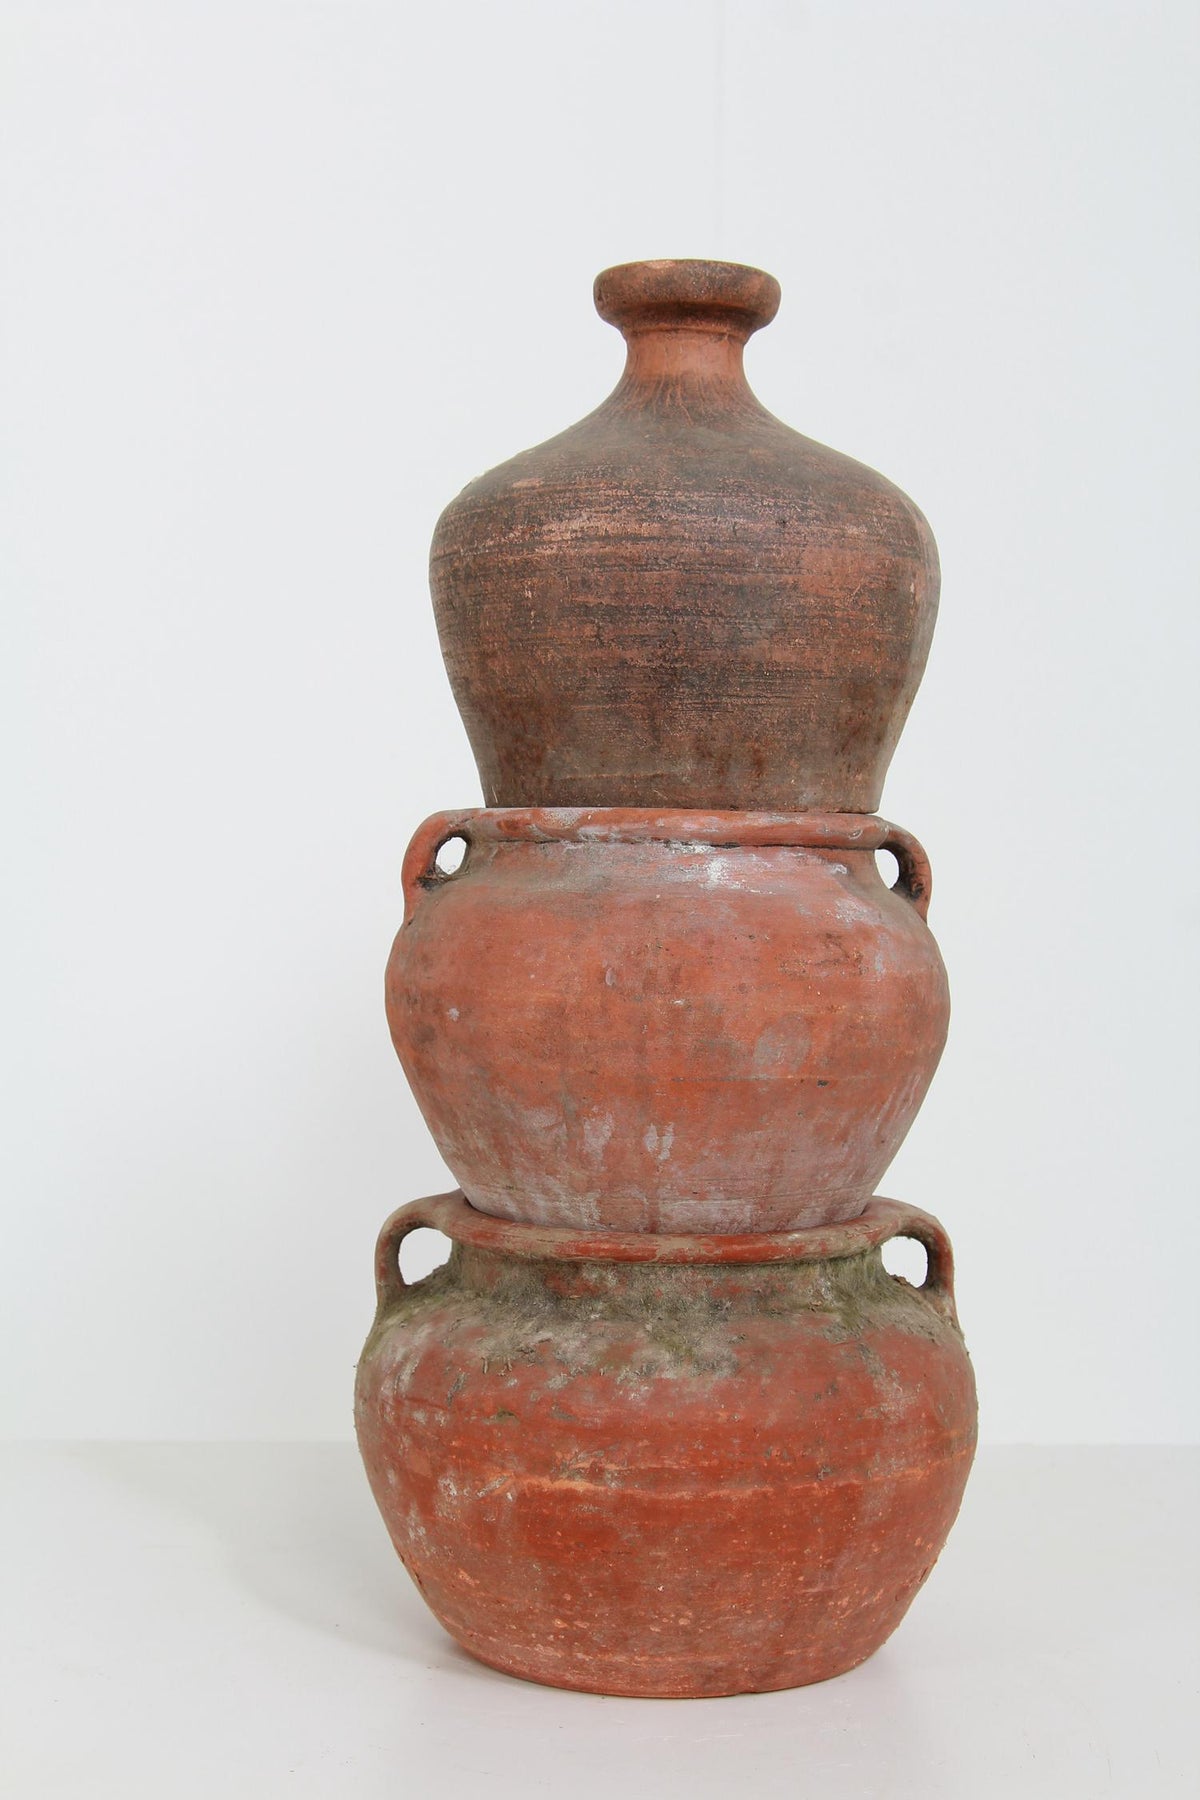 Collection of Three Charming Weathered Chinese Terracotta Pots